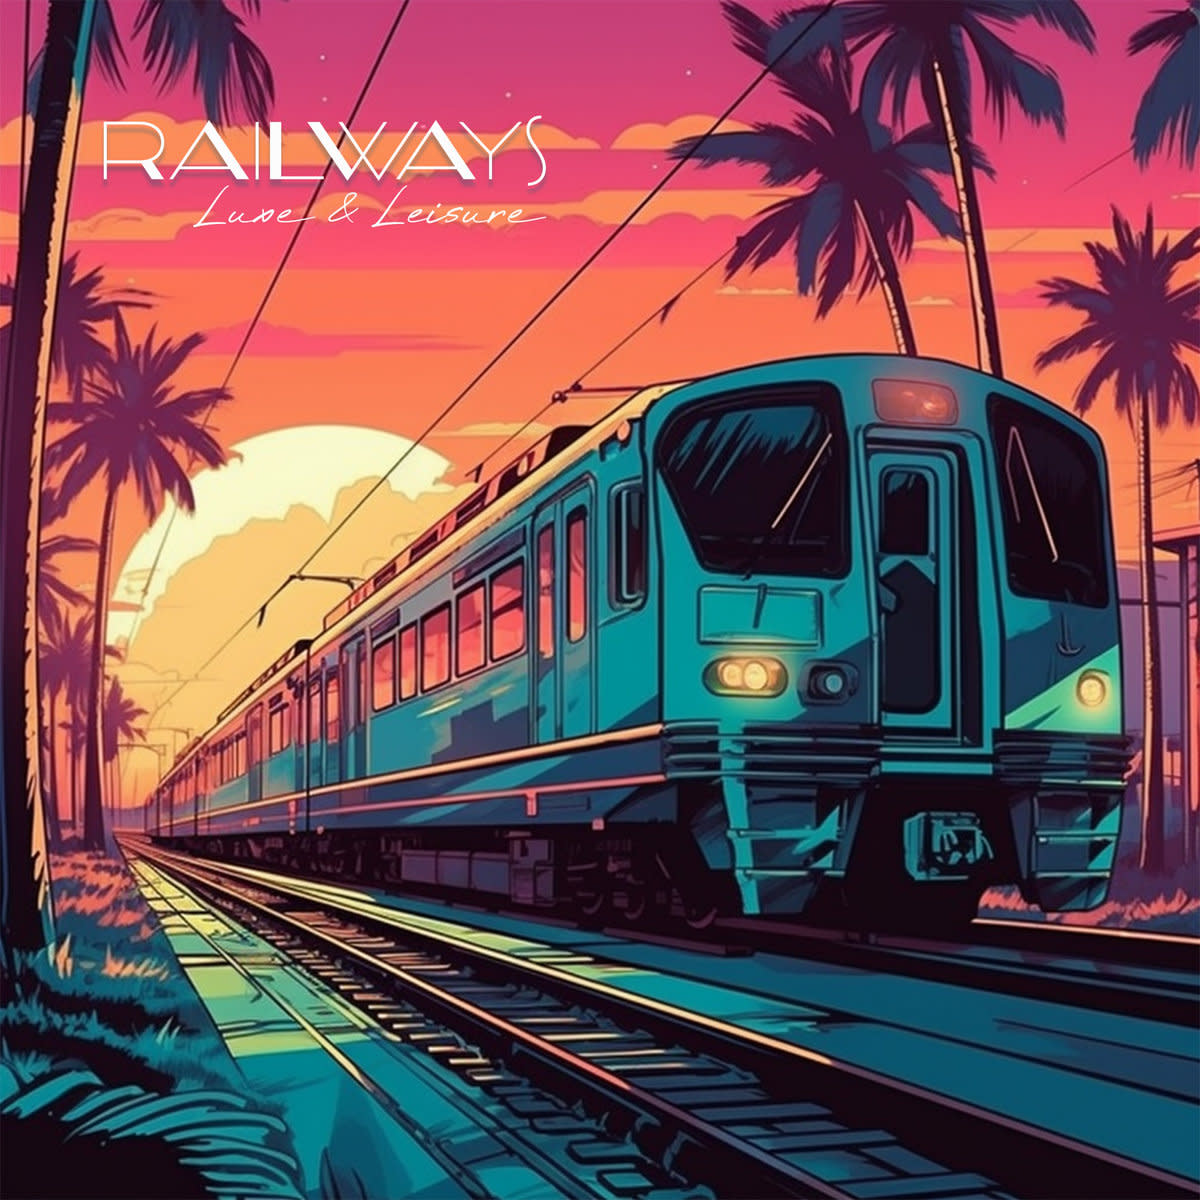 Synth Single Review: “Railways” by Luxe & Leisure